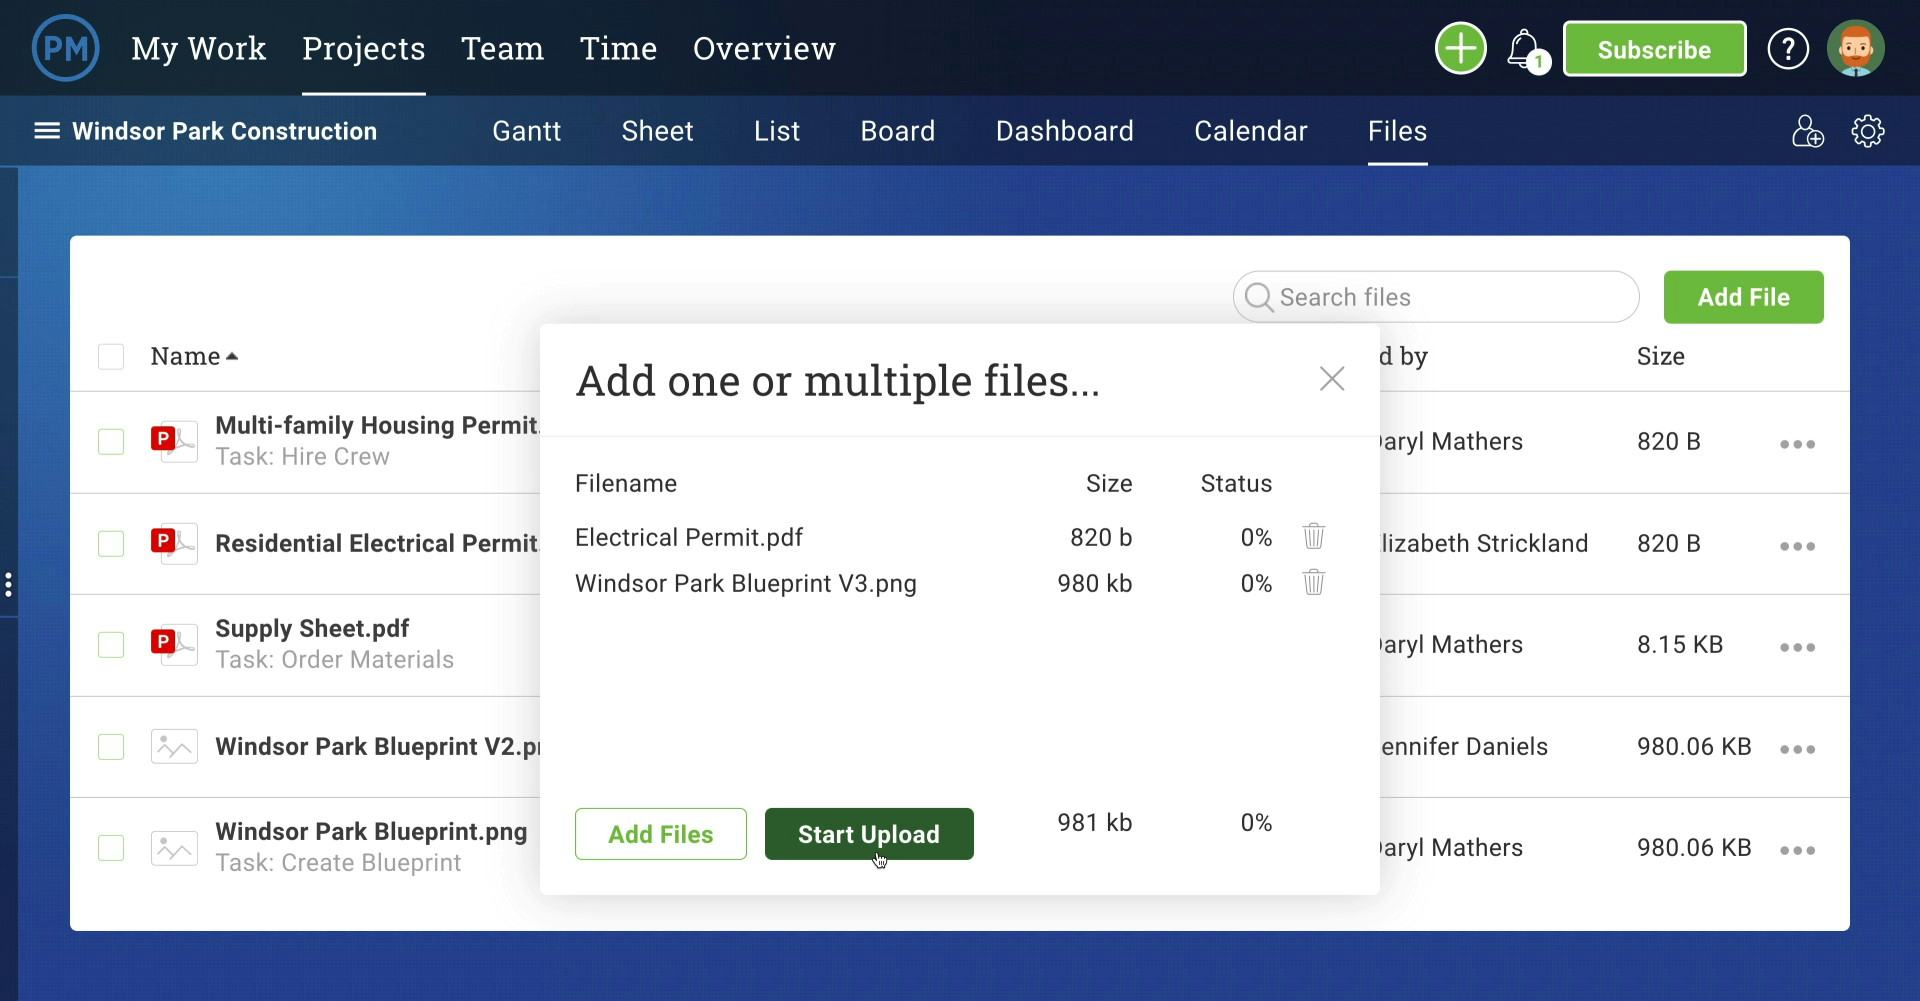 ProjectManager.com Software - Unlimited file storage keeps every important document in one place